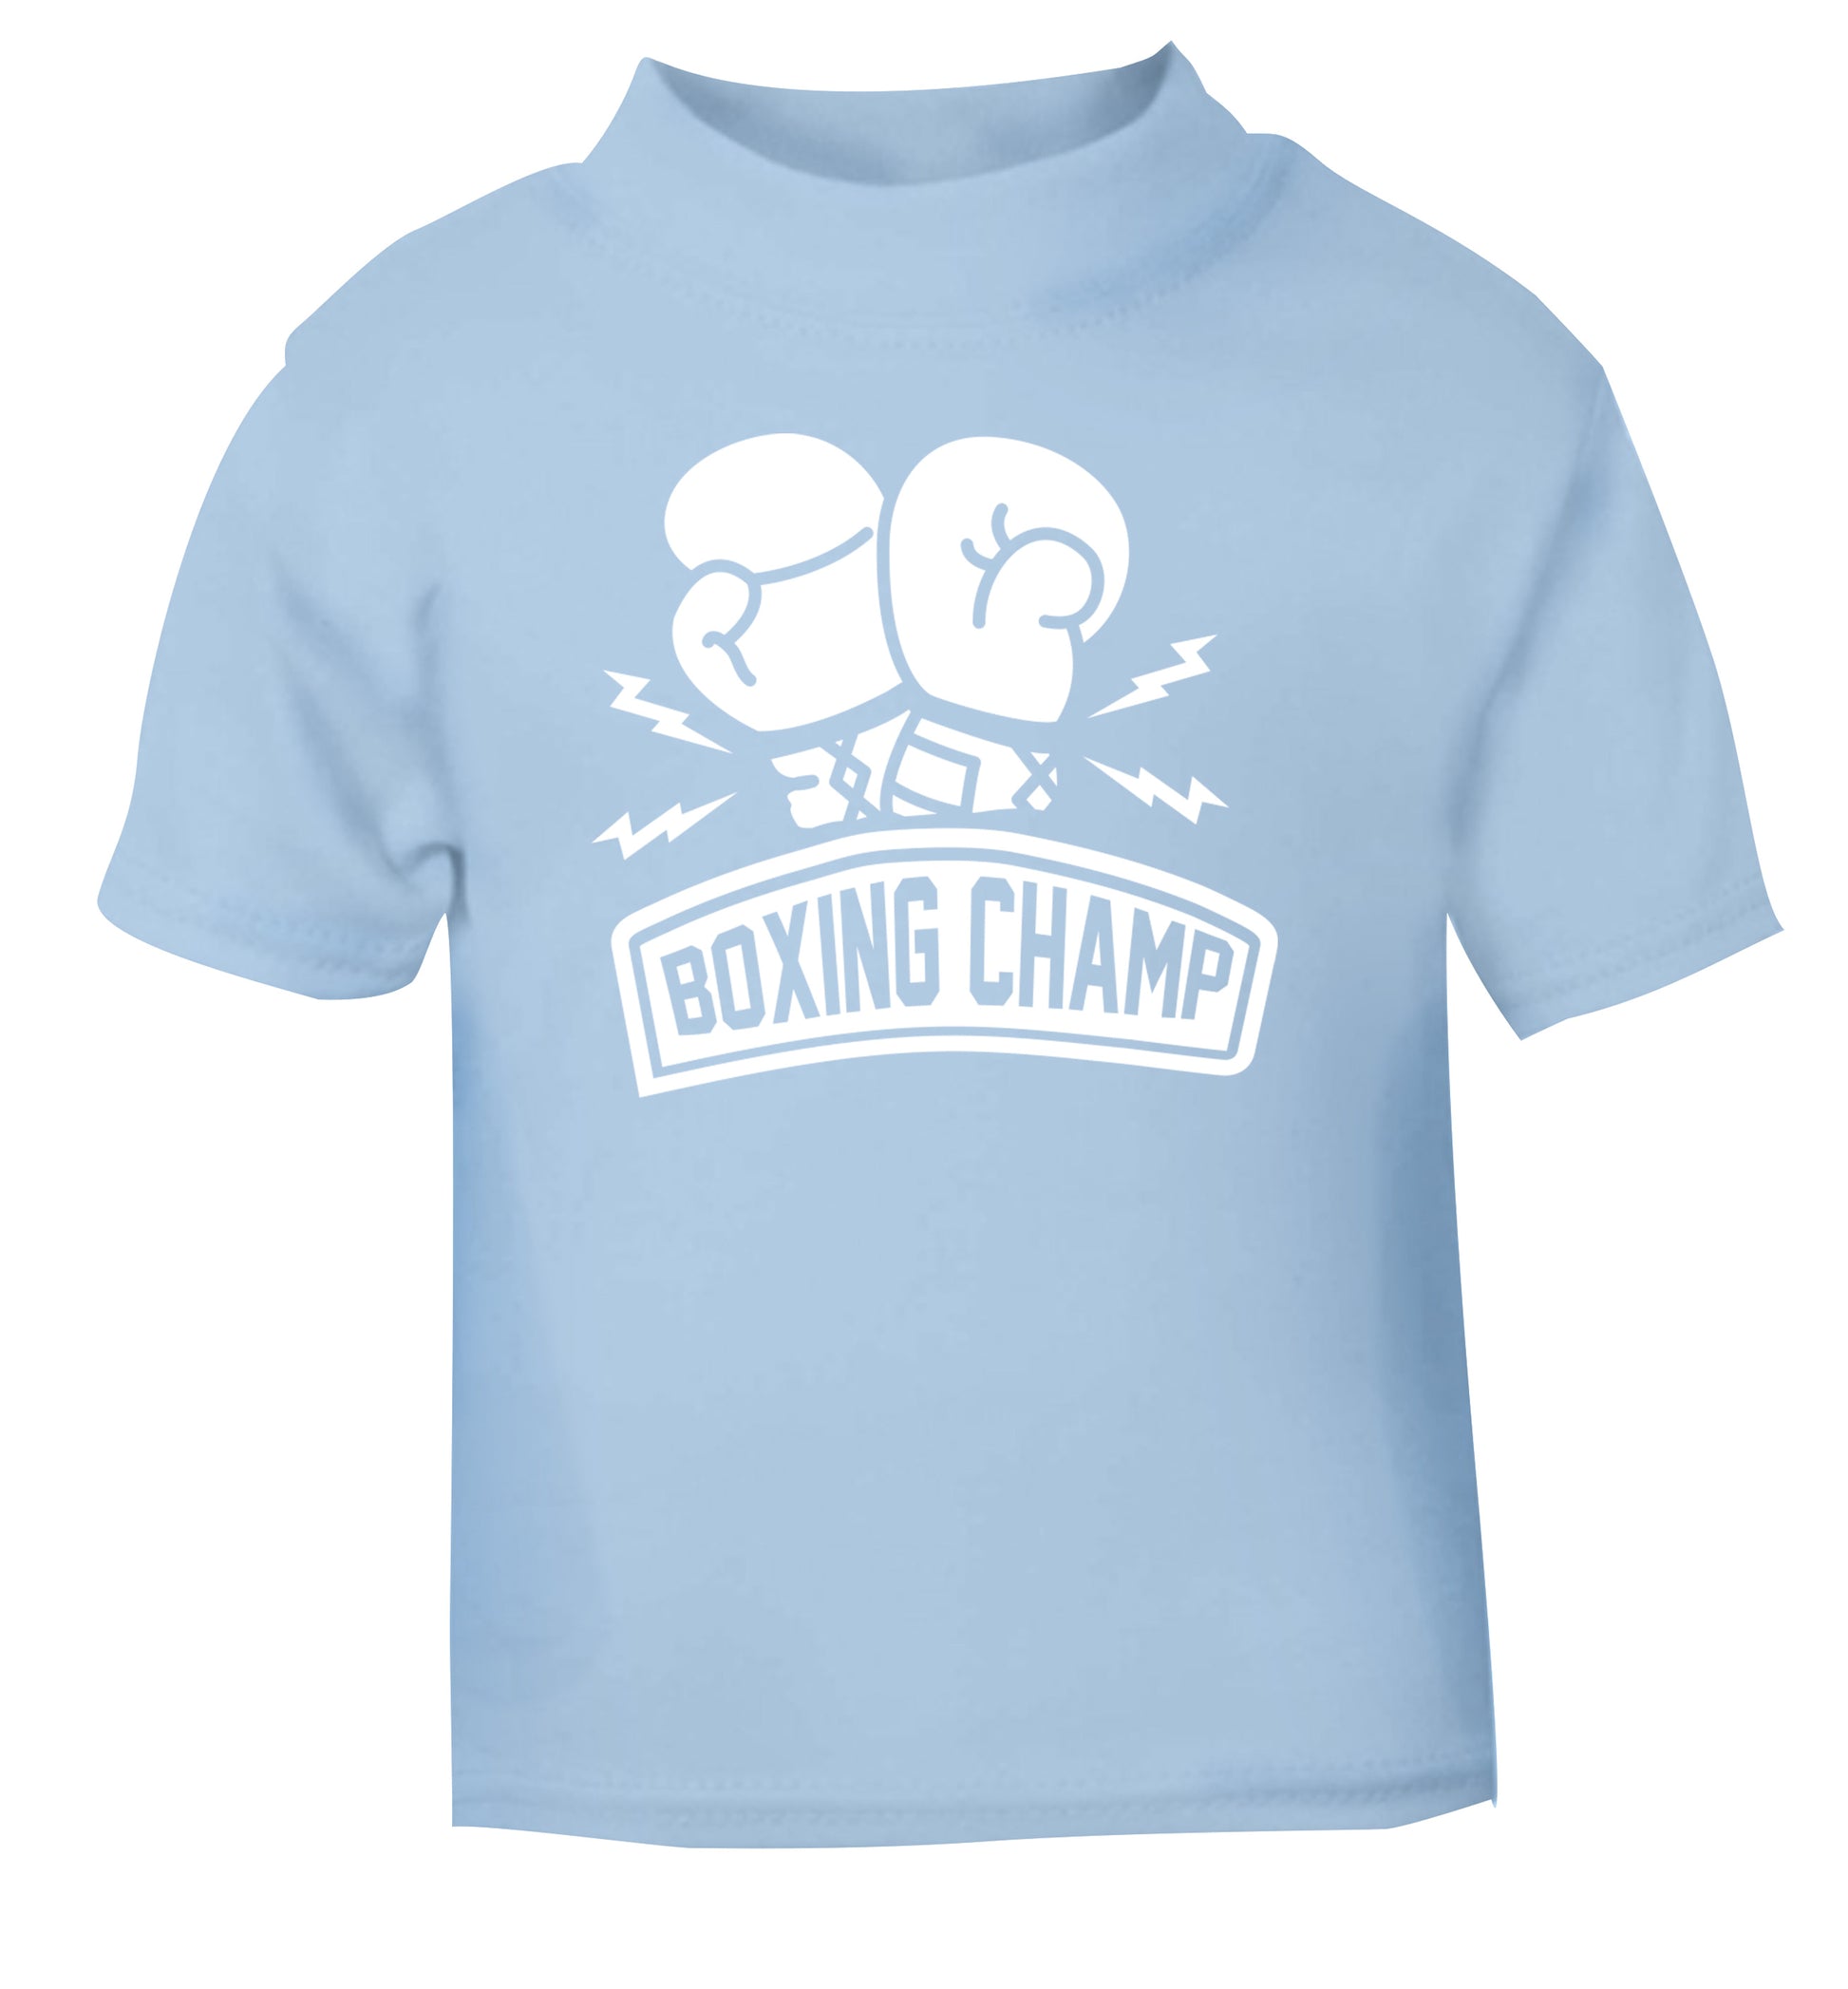 Boxing Champ light blue Baby Toddler Tshirt 2 Years